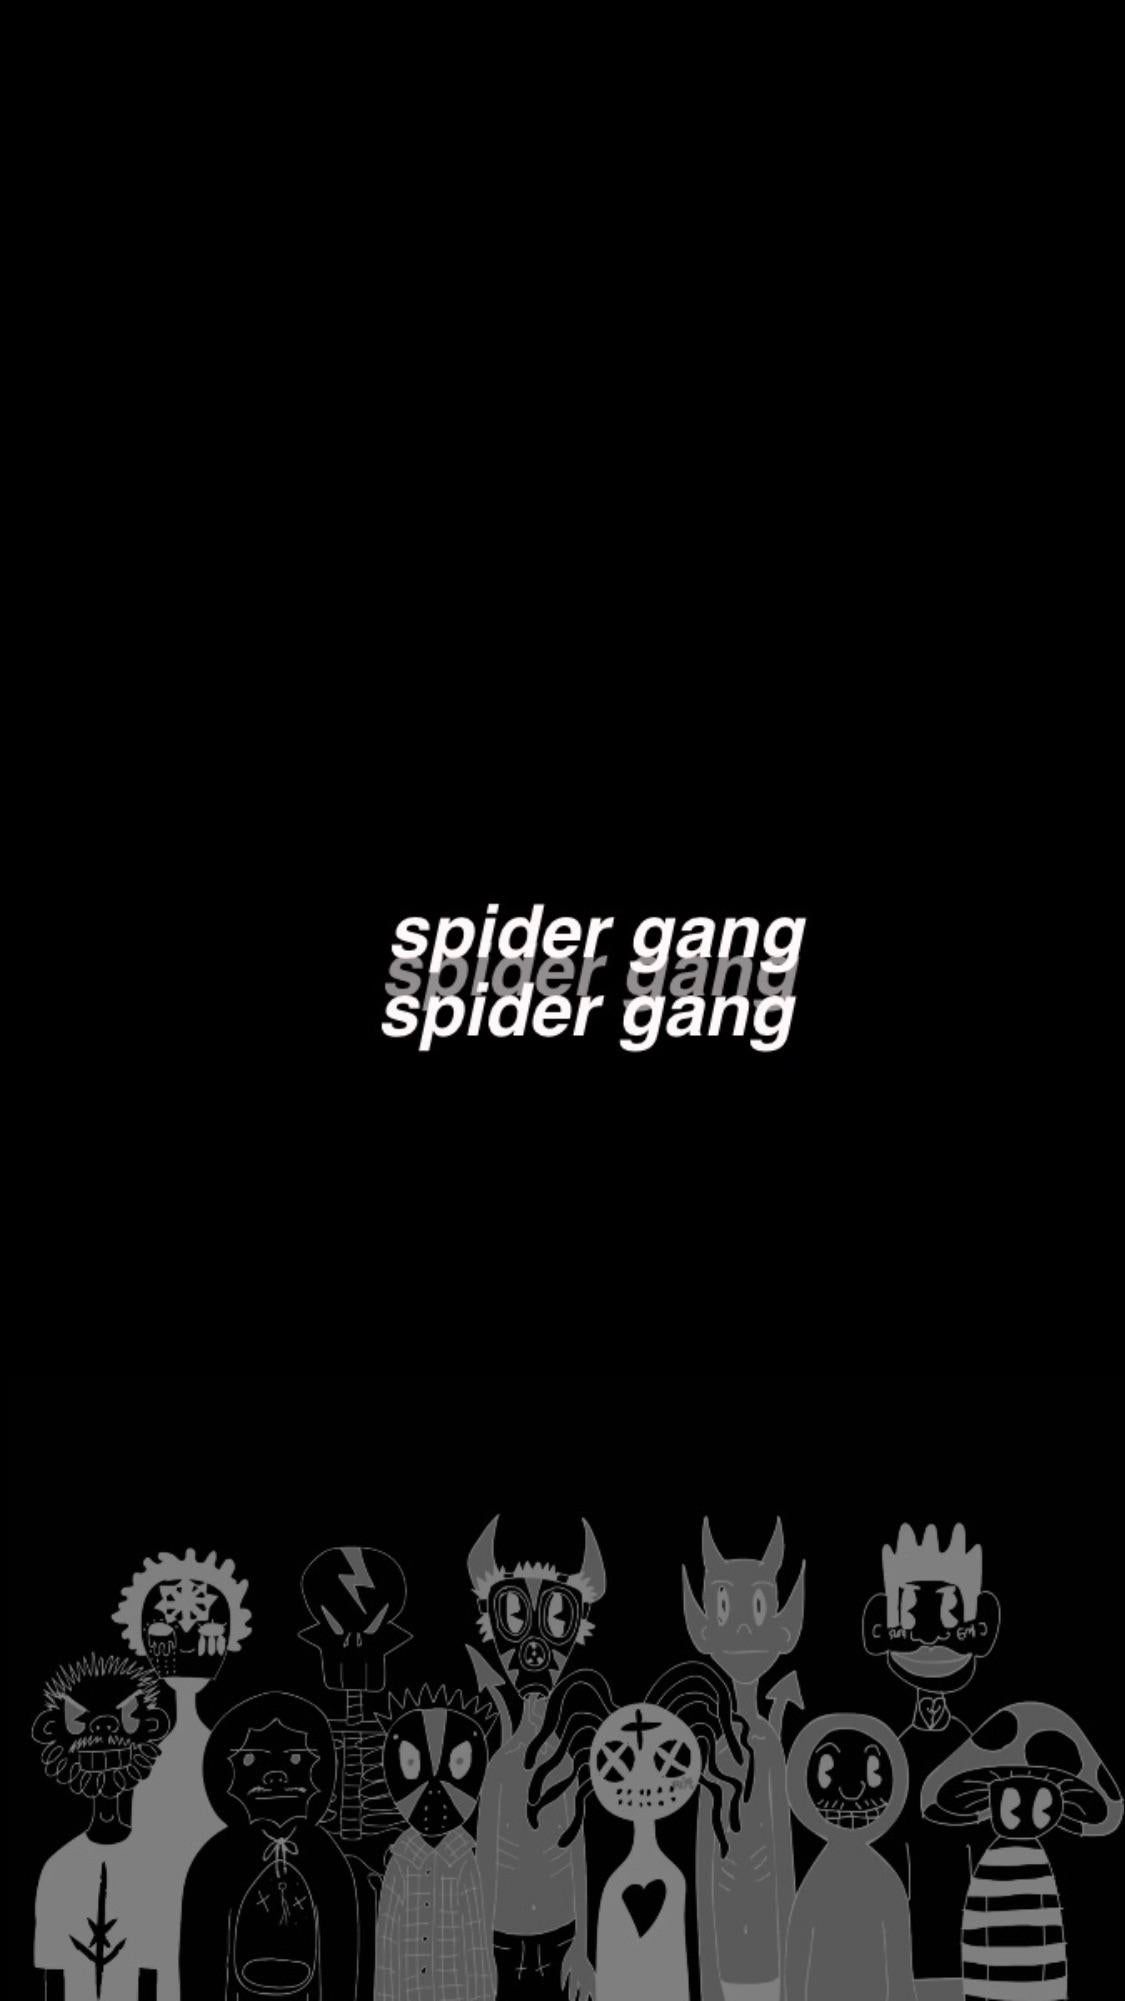 spidergang wallpaper i made:) feel free to use !!!